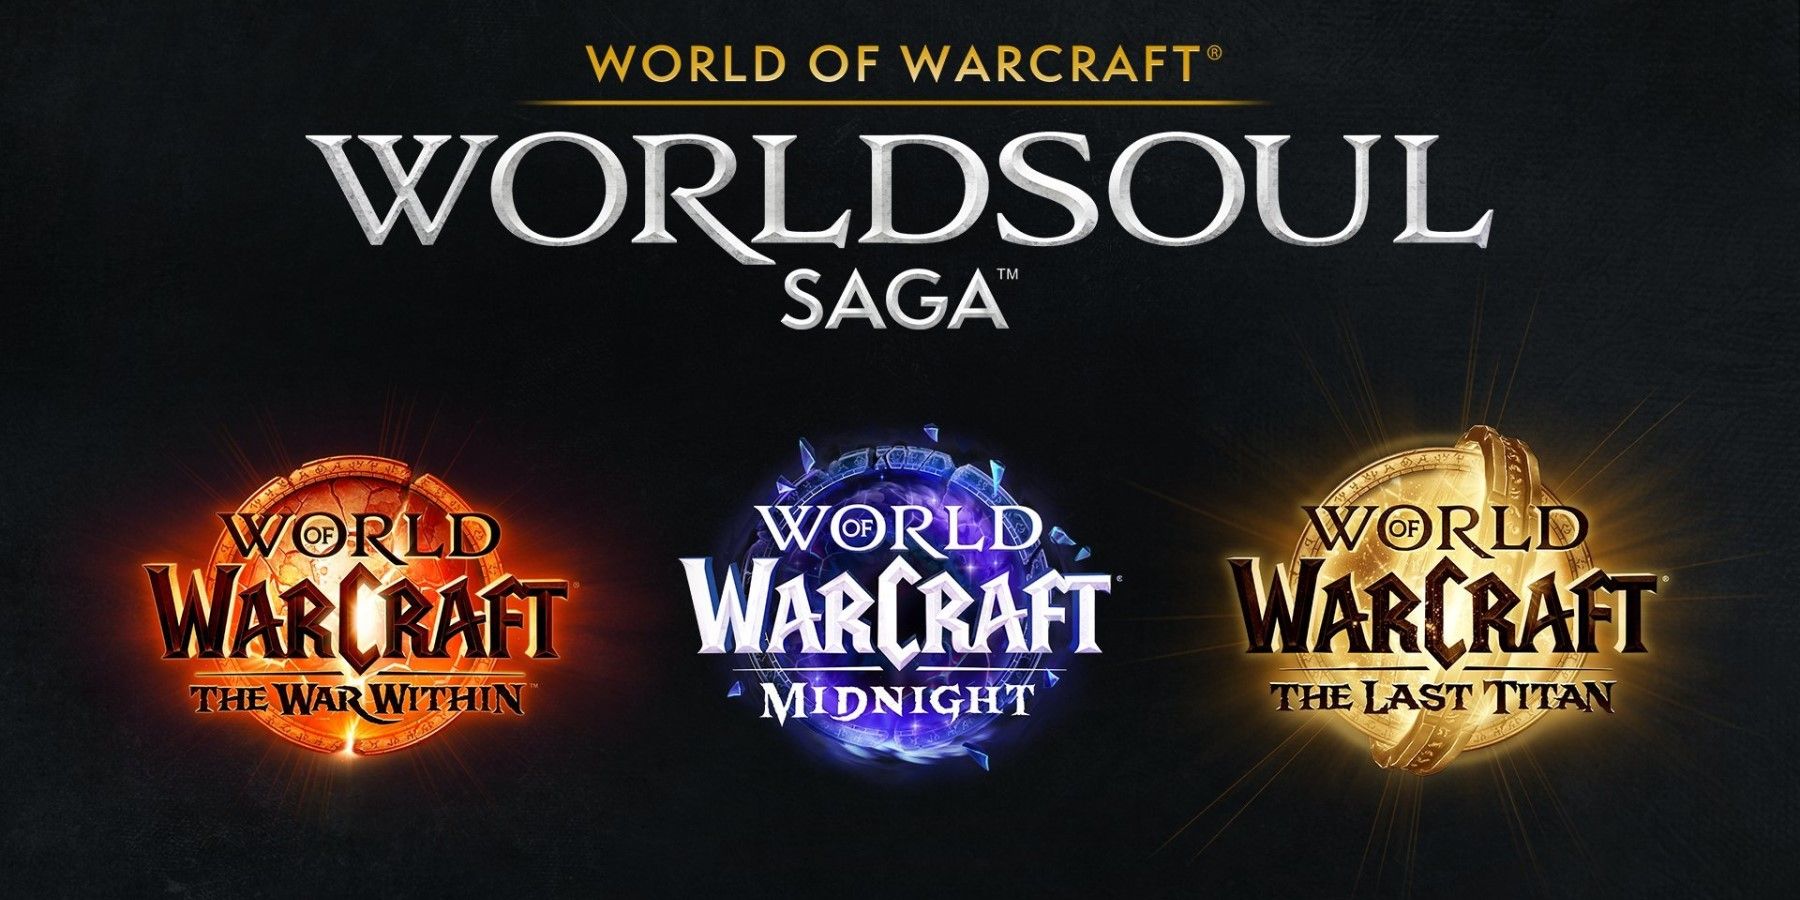 World of Warcraft Teases World Revamps in The Worldsoul Saga